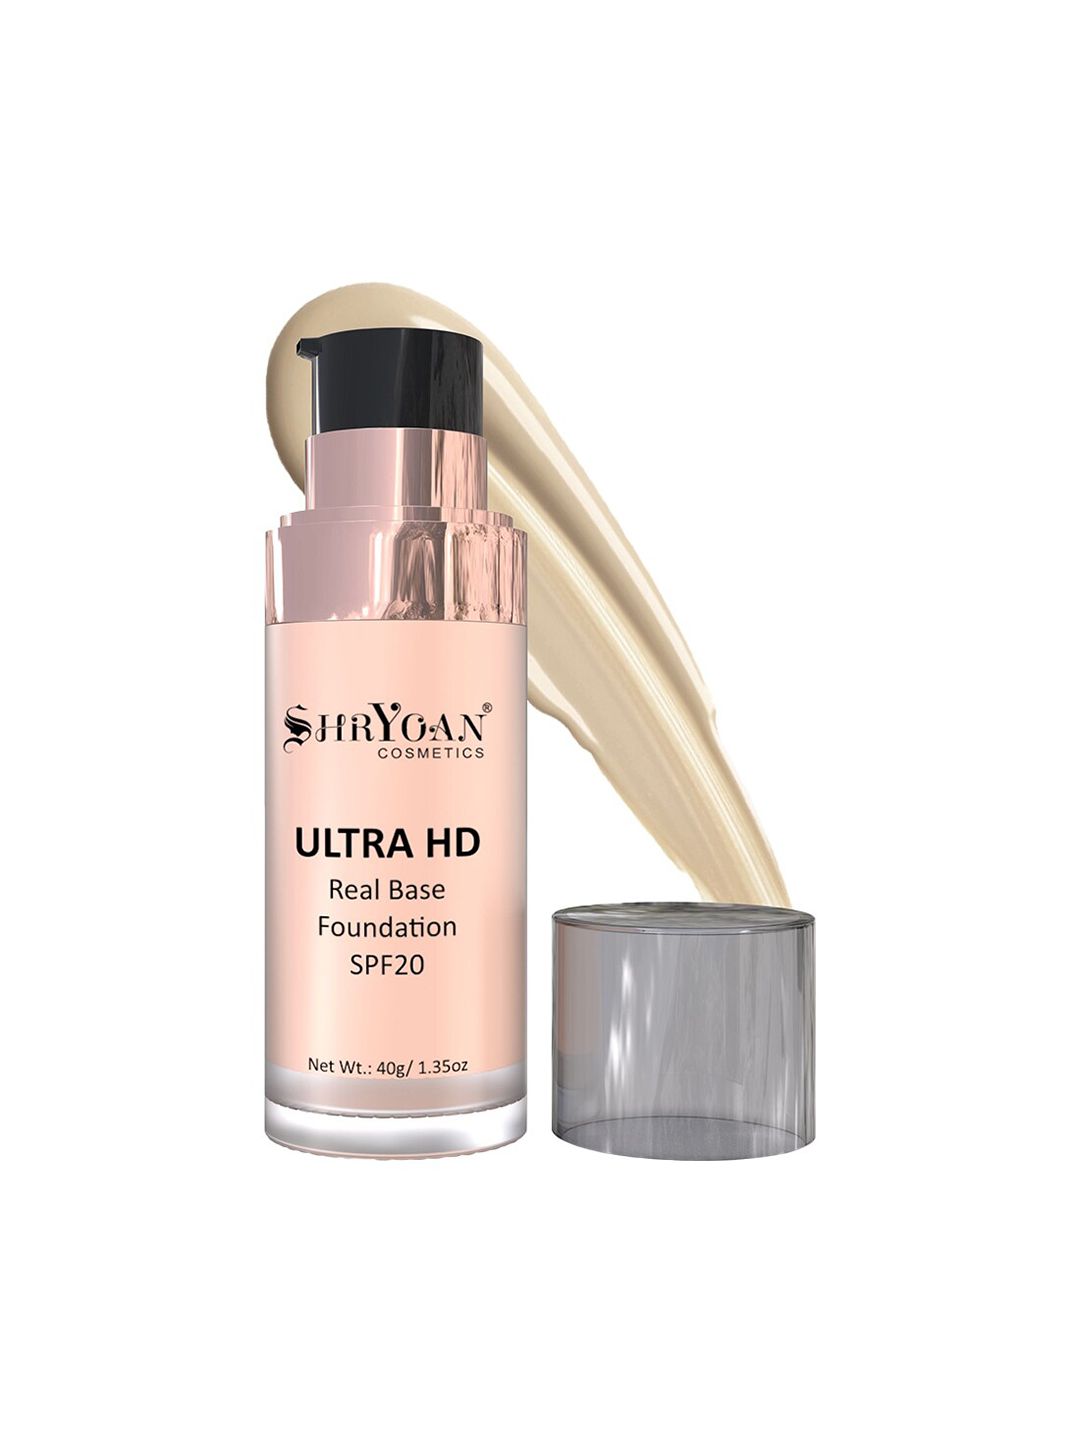 SHRYOAN Ultra HD Real Base Foundation 40g Price in India